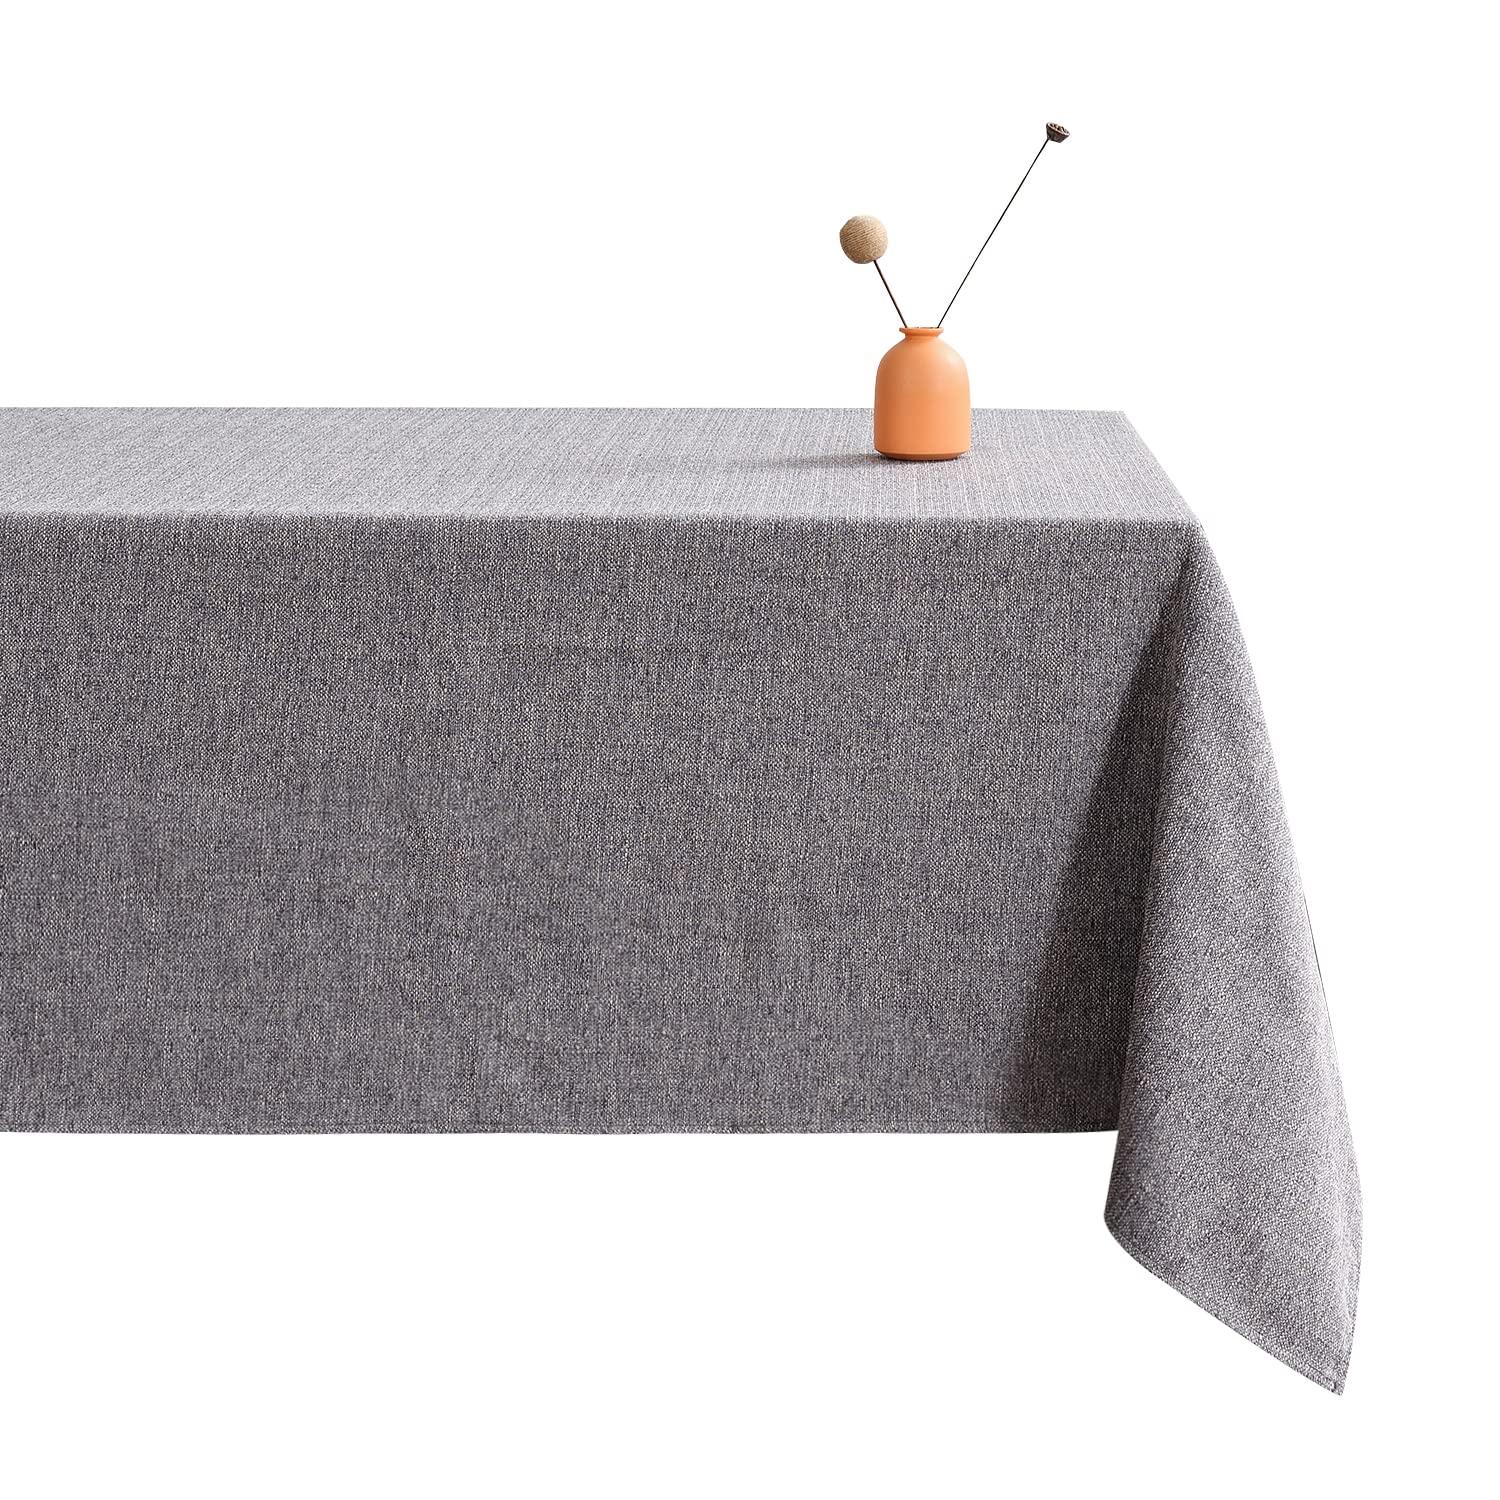 LUOLUO Rectangular Tablecloth Waterproof Thick Faux Linen Wrinkle Resistant Table Cover for Dining Kitchen Home Restaurant (Grey, 140 x 240cm) 0